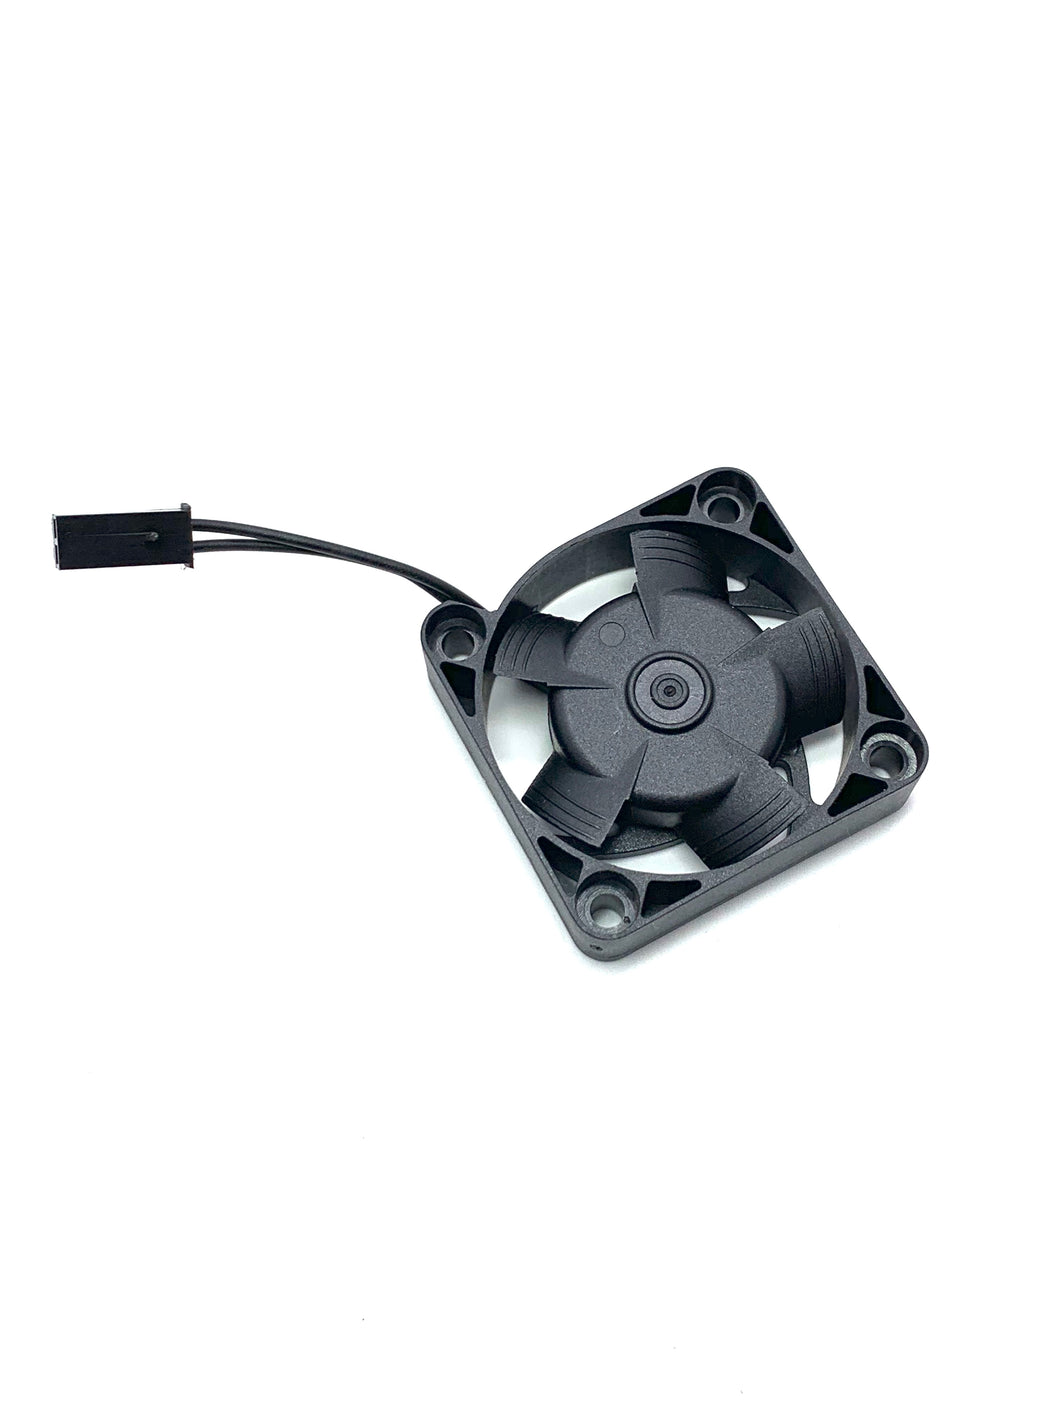 Team Zombie 40mm hyper blade cooling fan with JST+JR extension